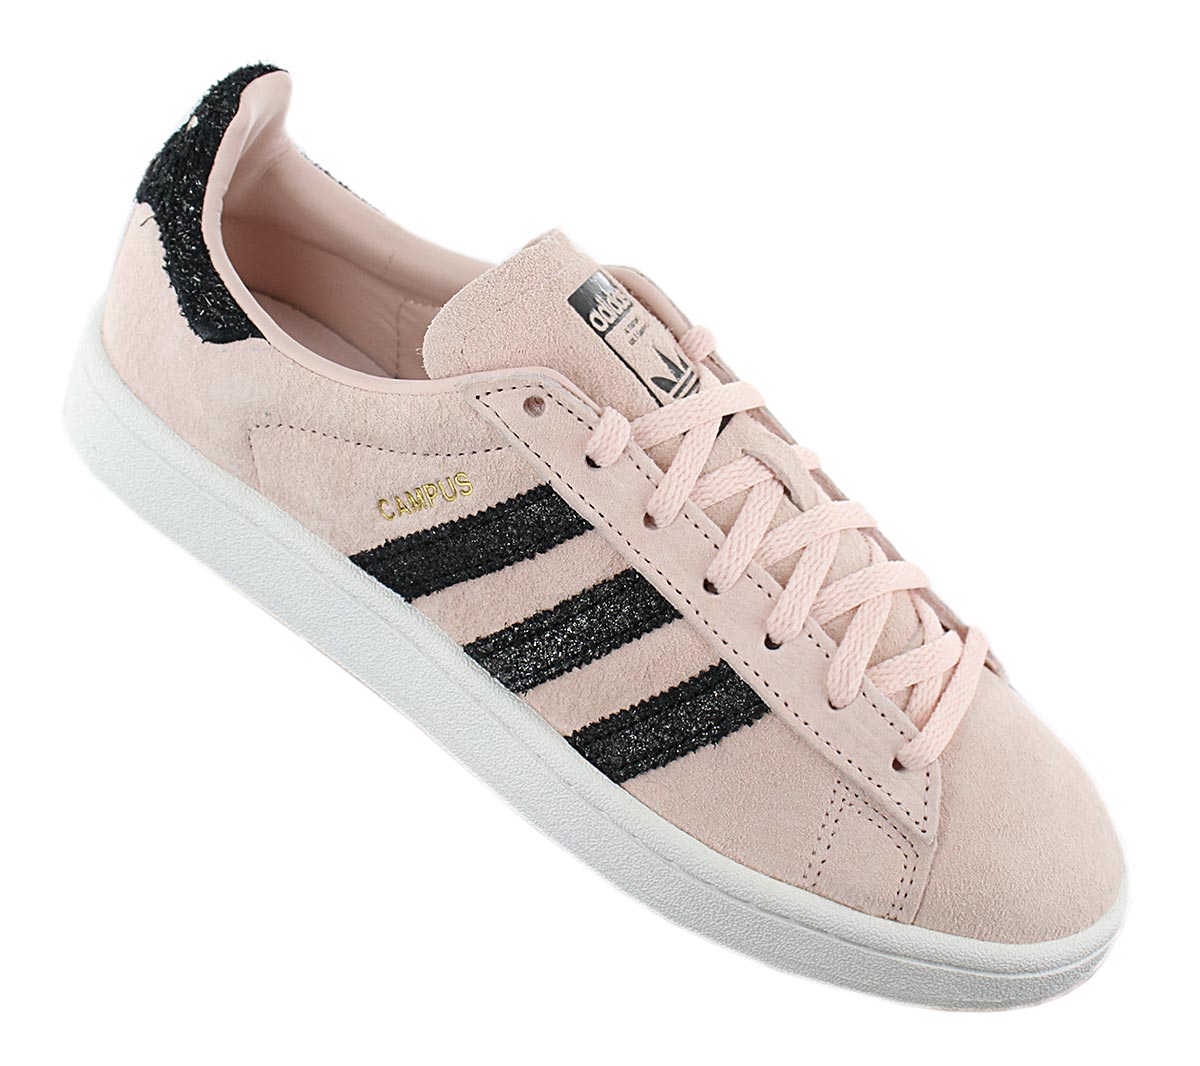 NEW adidas Originals Campus W B37934 Women`s Shoes Trainers Sneakers SALE |  eBay